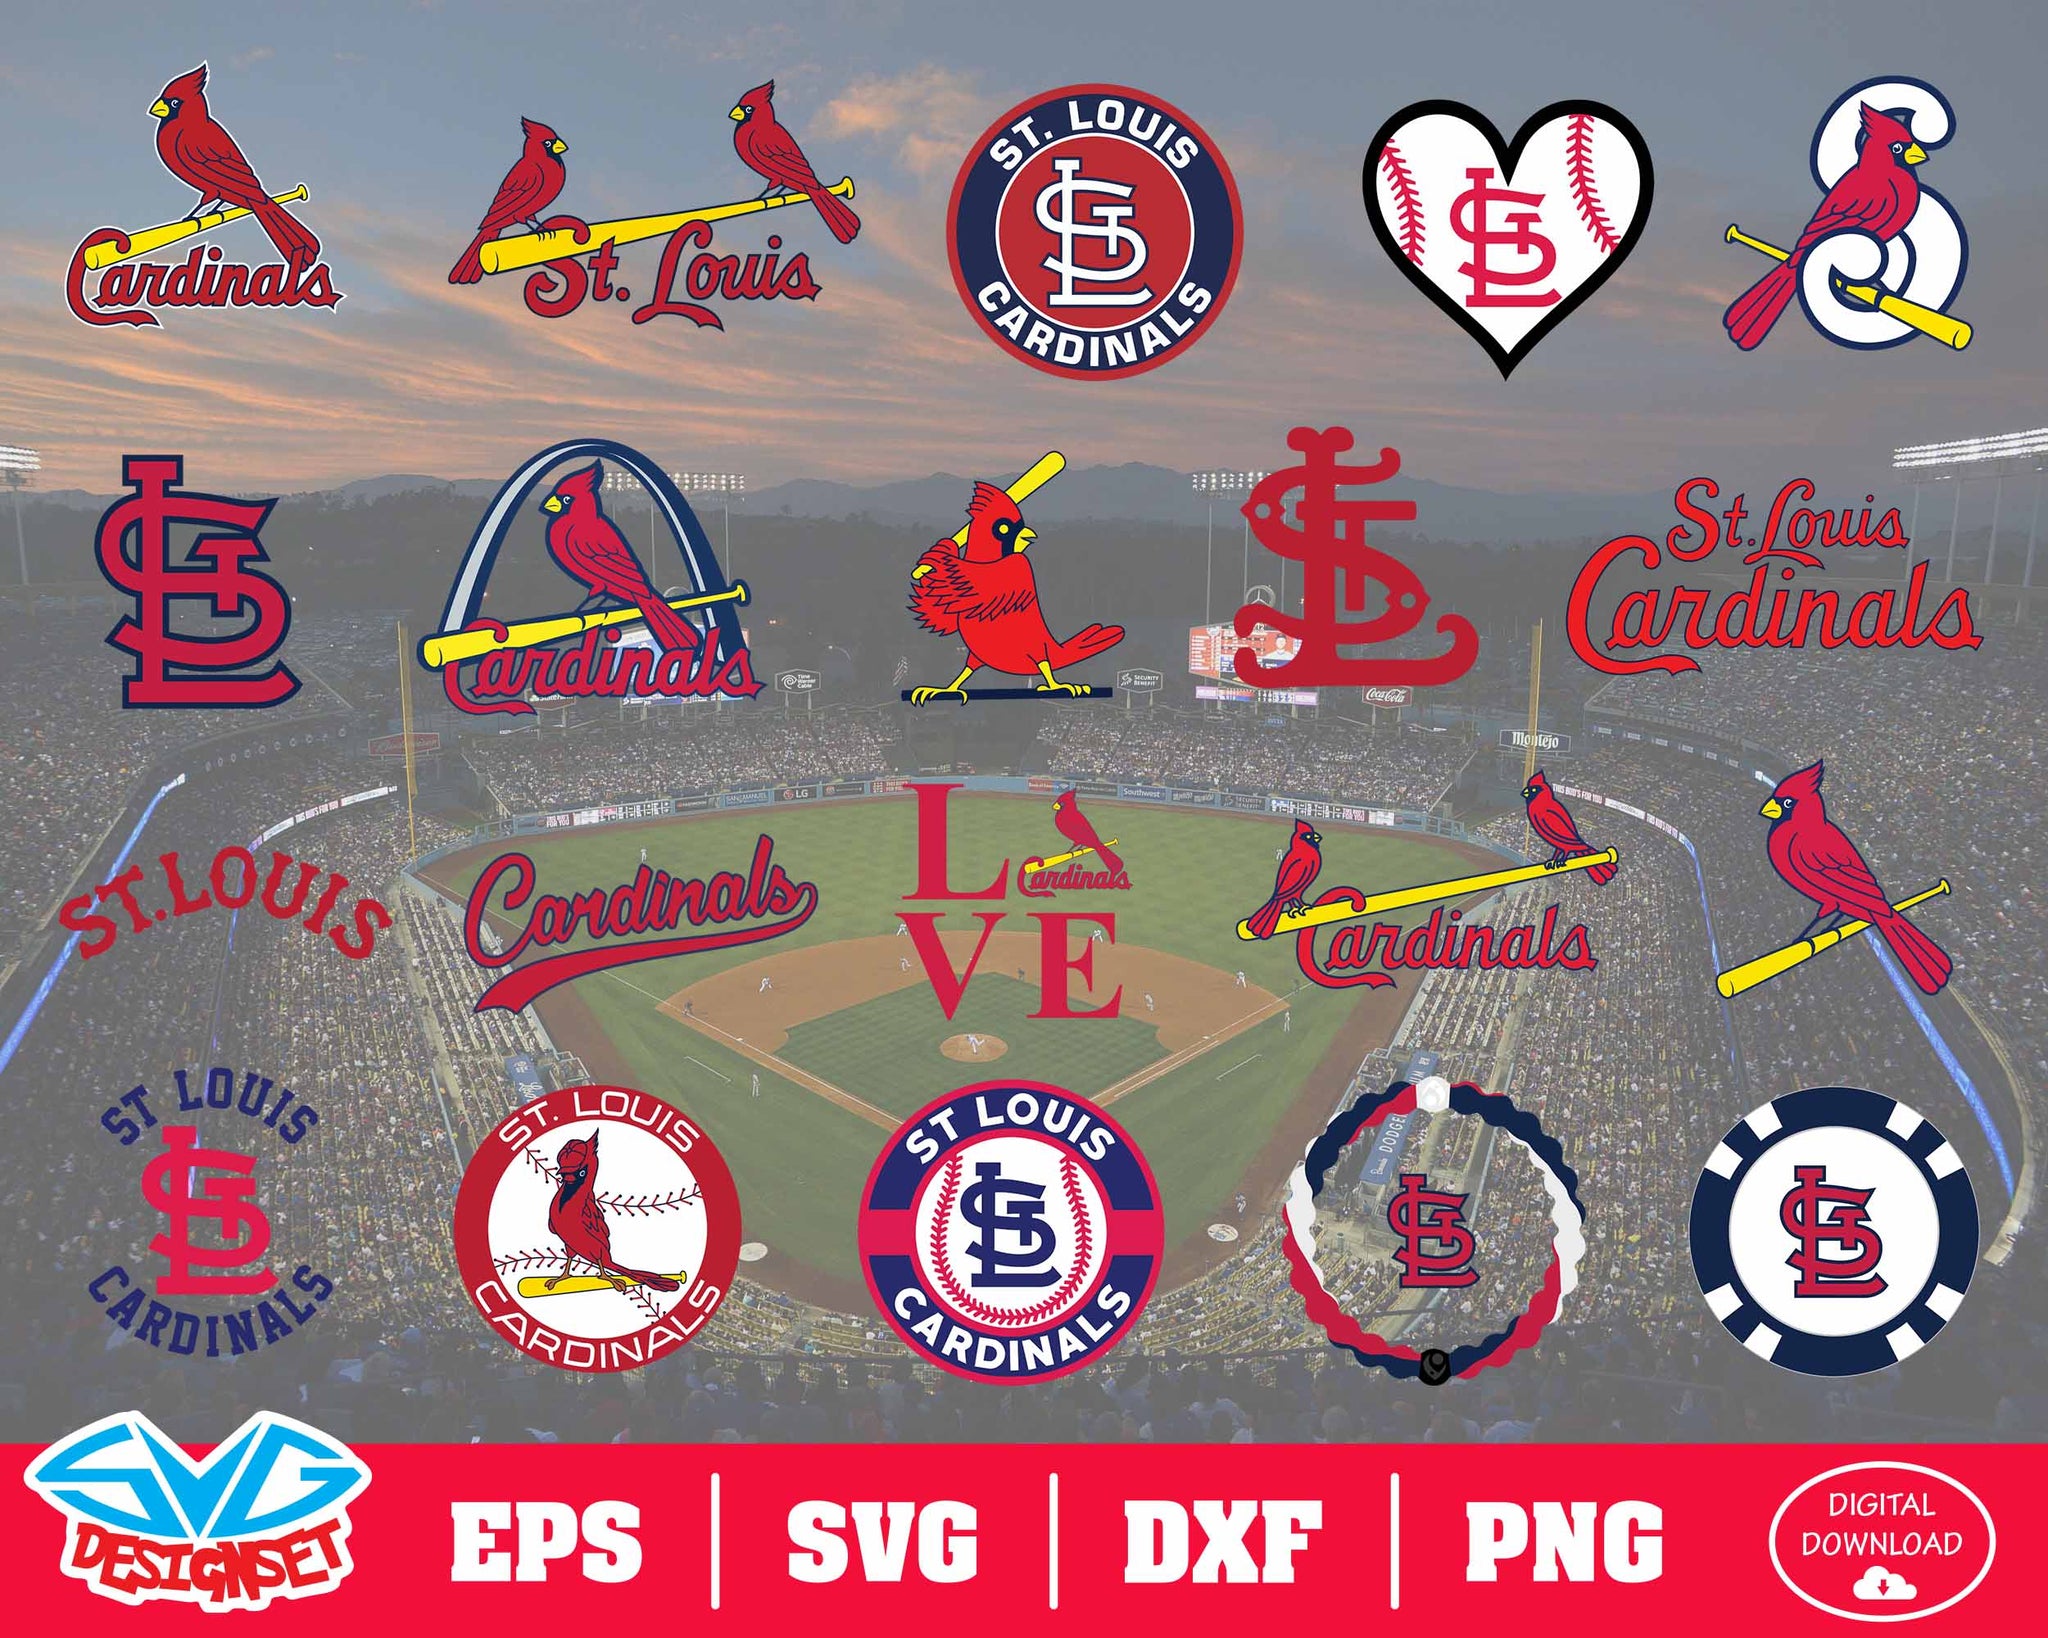 St. Louis Cardinals Team Svg, Dxf, Eps, Png, Clipart, Silhouette and C